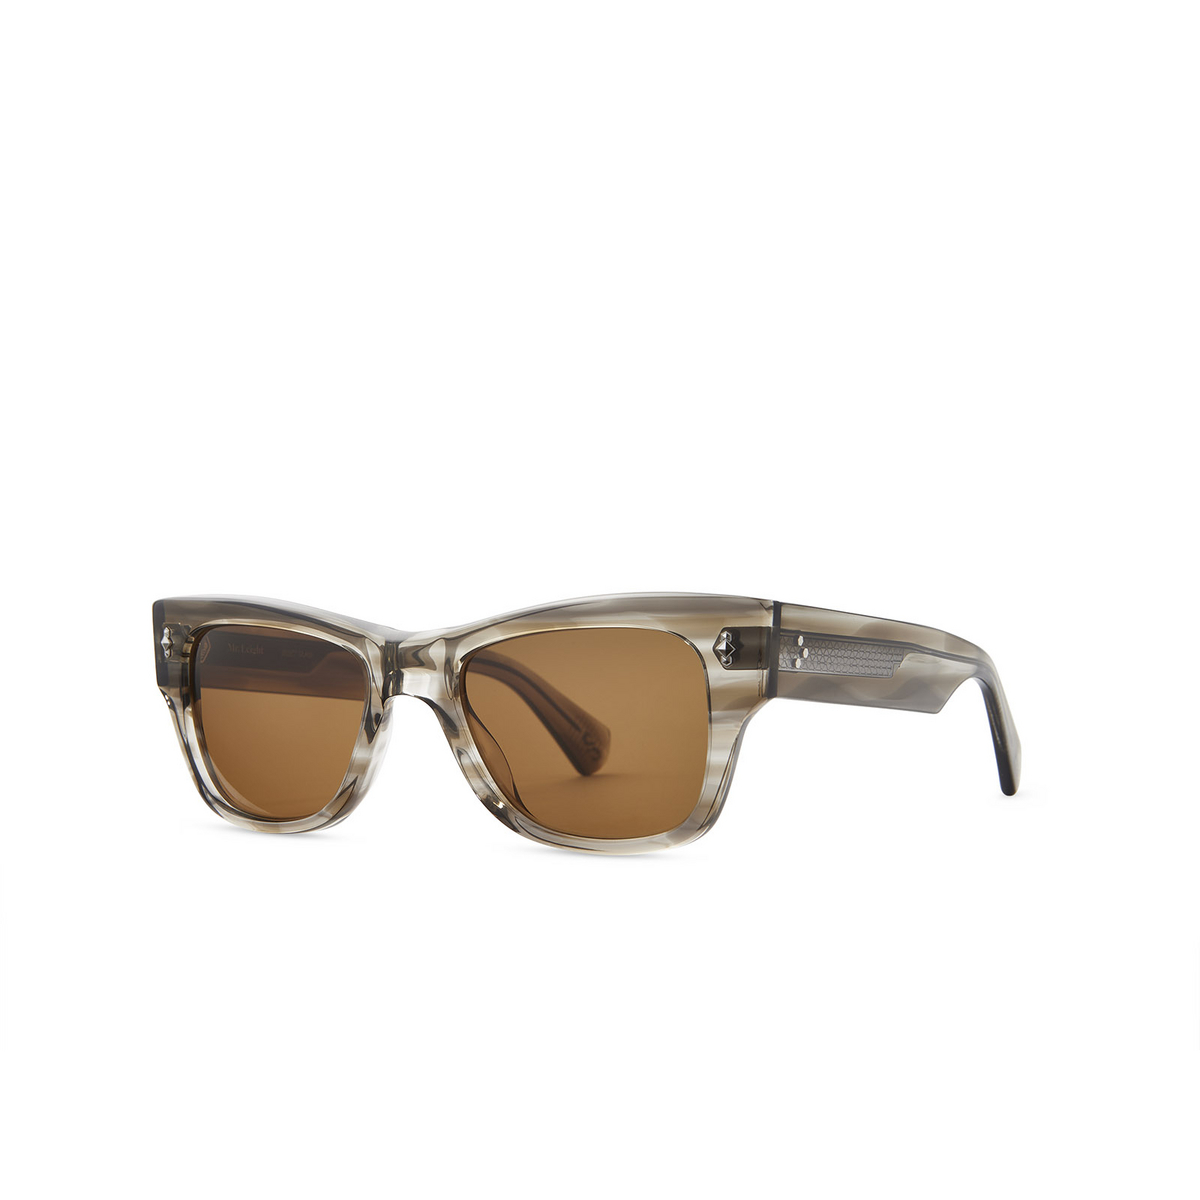 Mr. Leight DUKE S Sunglasses CSTGRY-PW/SUNSV Celestial Grey-Pewter - three-quarters view